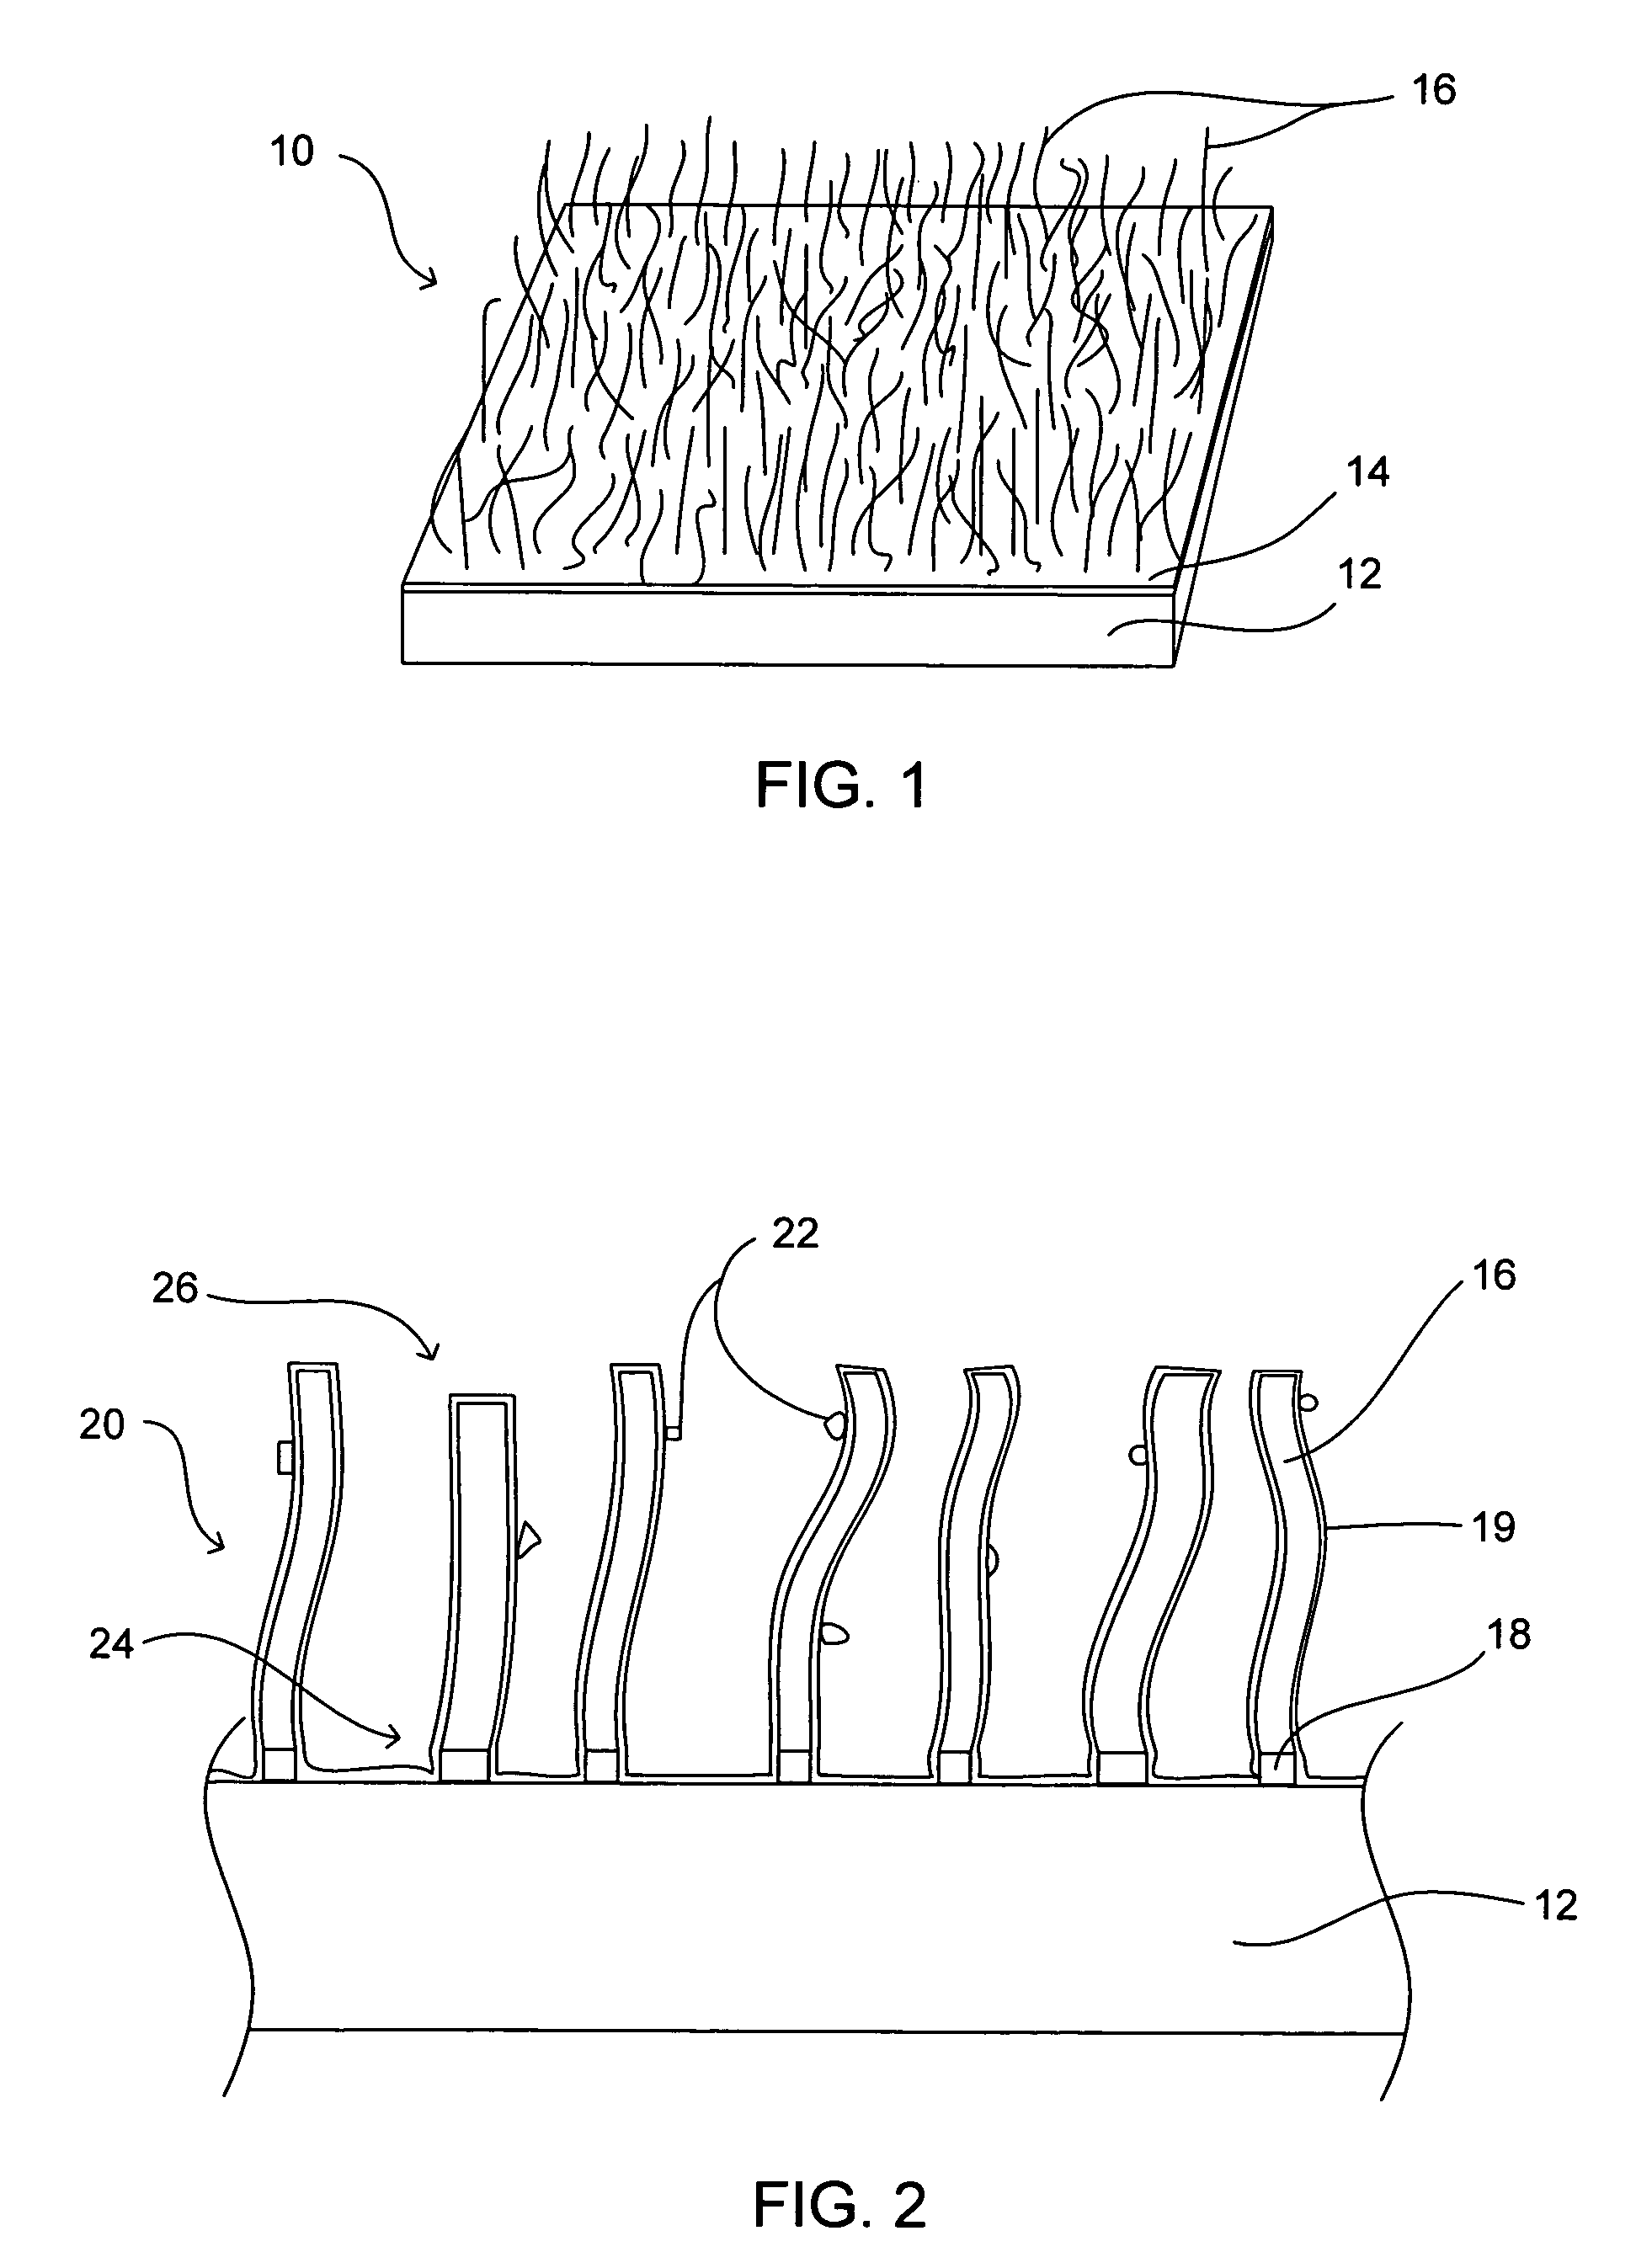 Free-standing nanowire method for detecting an analyte in a fluid